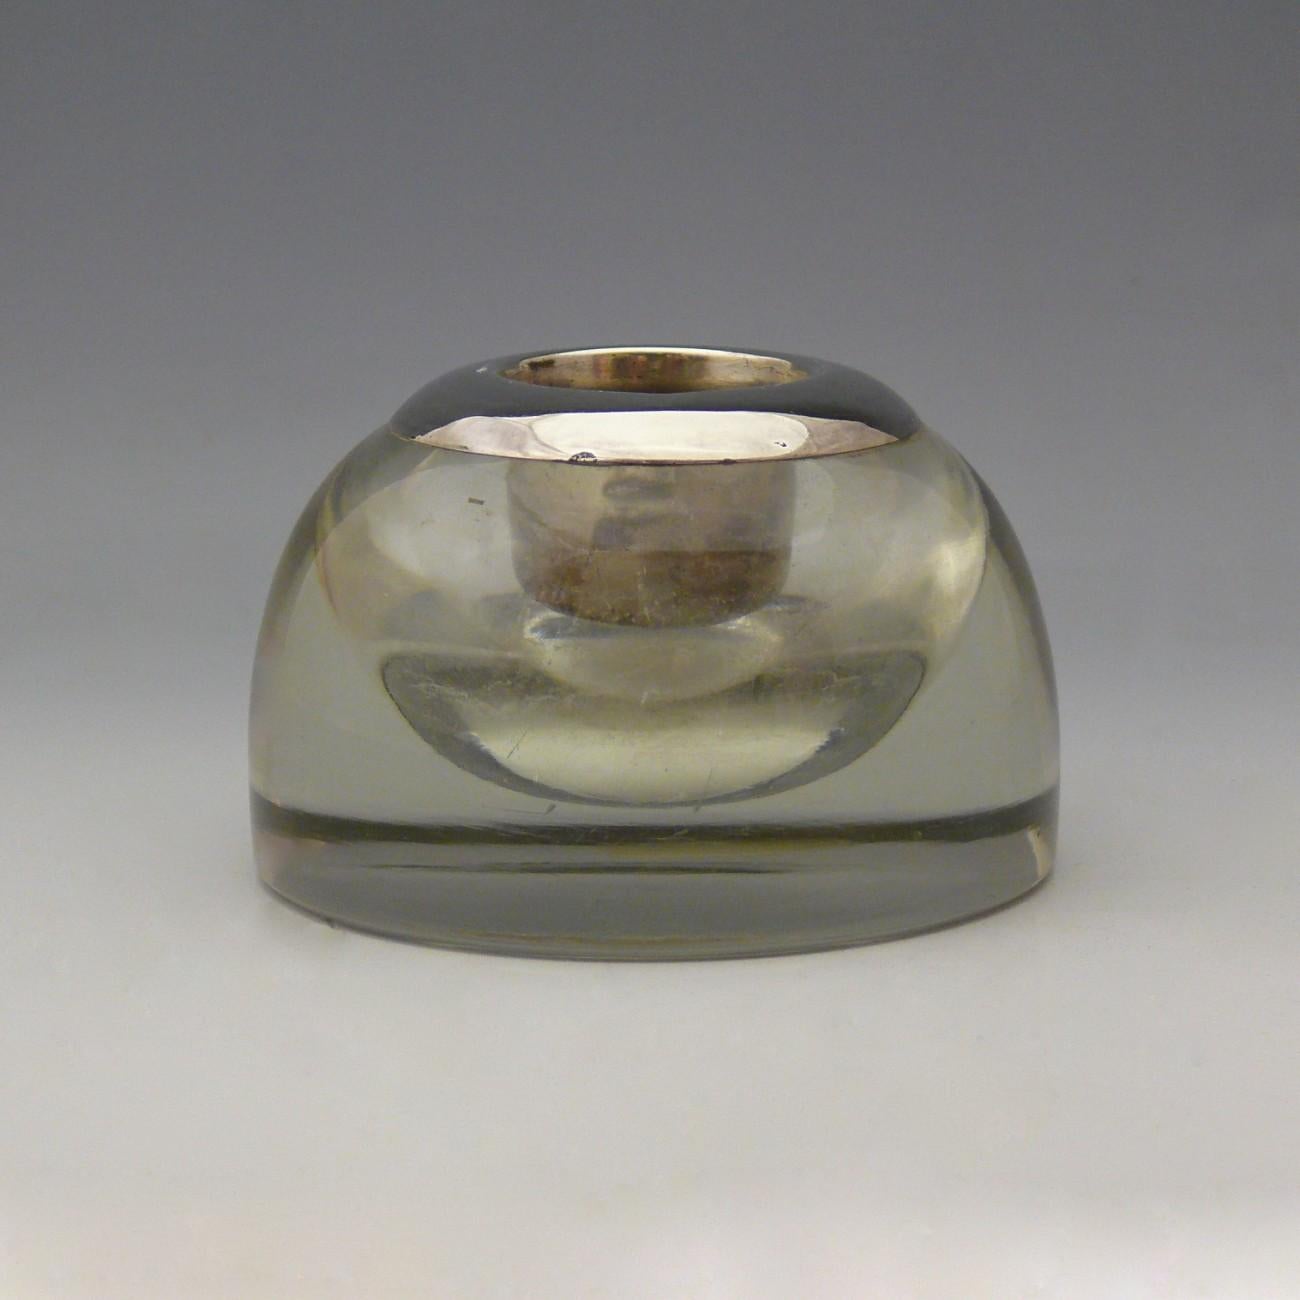 A fine glass match safe with sterling silver collar hallmarked, London, 1926.

Dimensions: 9 cm/3⅝ inches (diameter)

Bentleys are Members of LAPADA, the London and Provincial Antique Dealers Association.